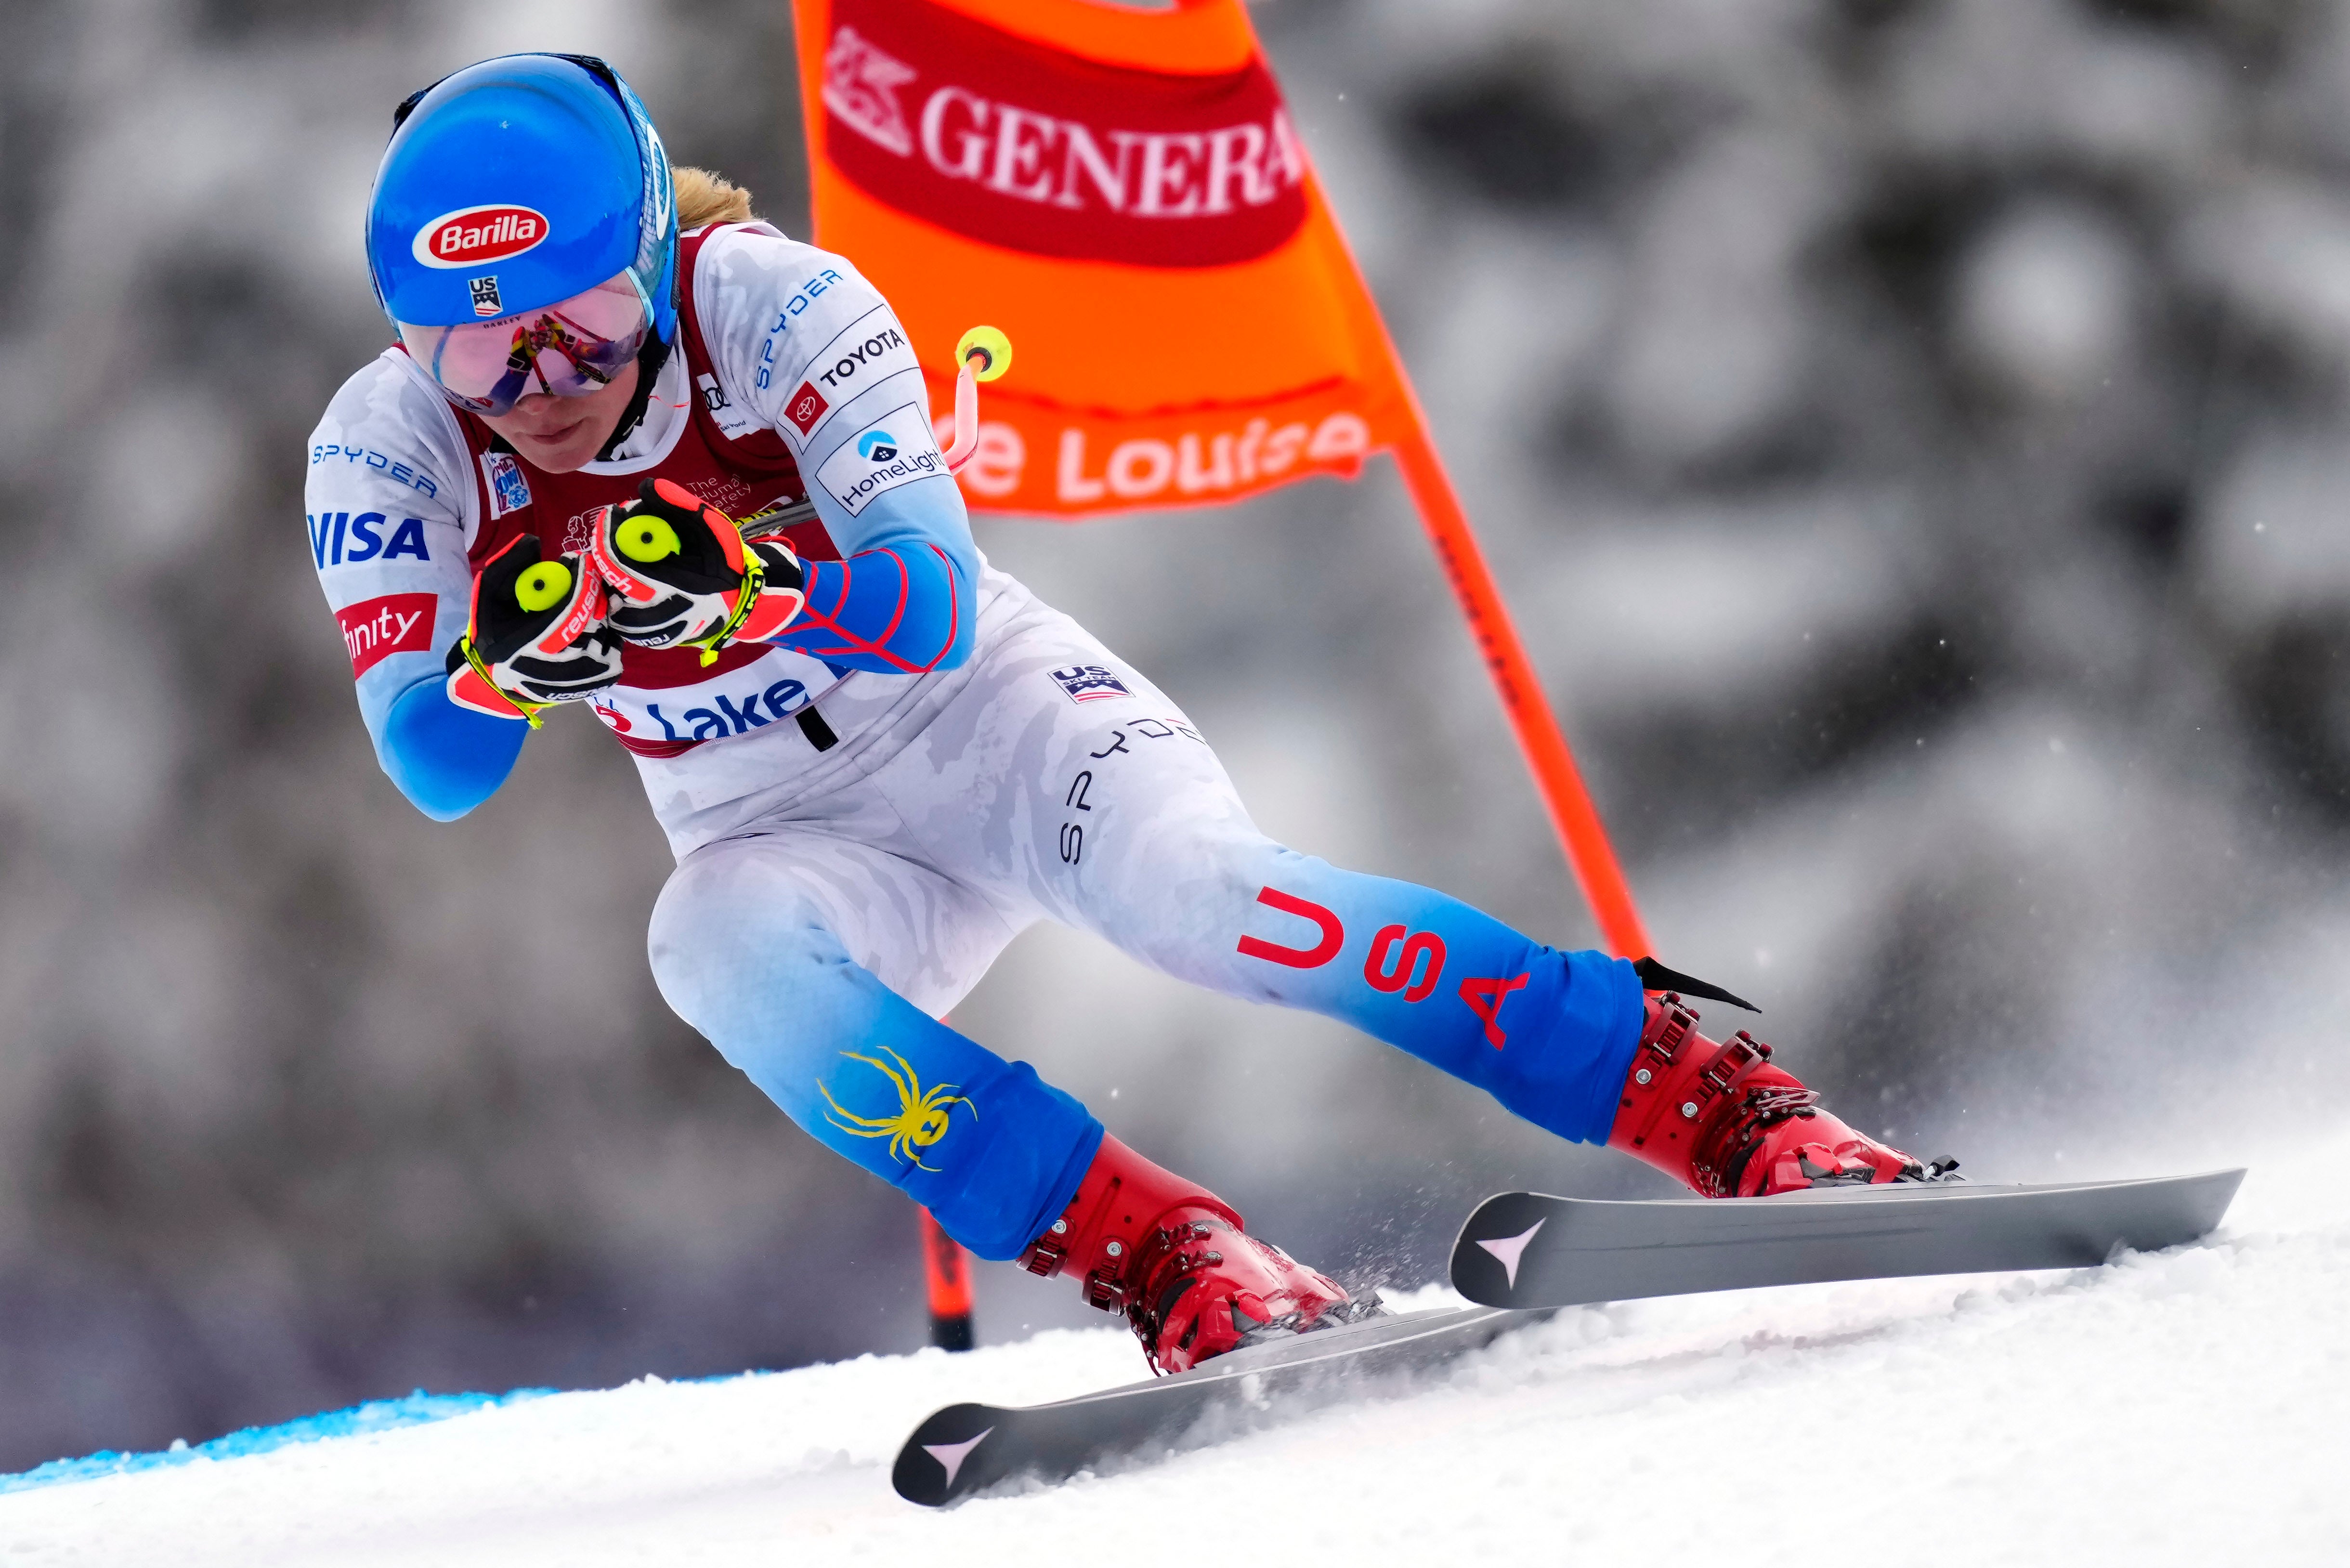 Mikaela Shiffrin, of the United States, races down the course during a training run for the World Cup downhill ski race, Tuesday, Nov. 30, 2021, in Lake Louise, Alberta.